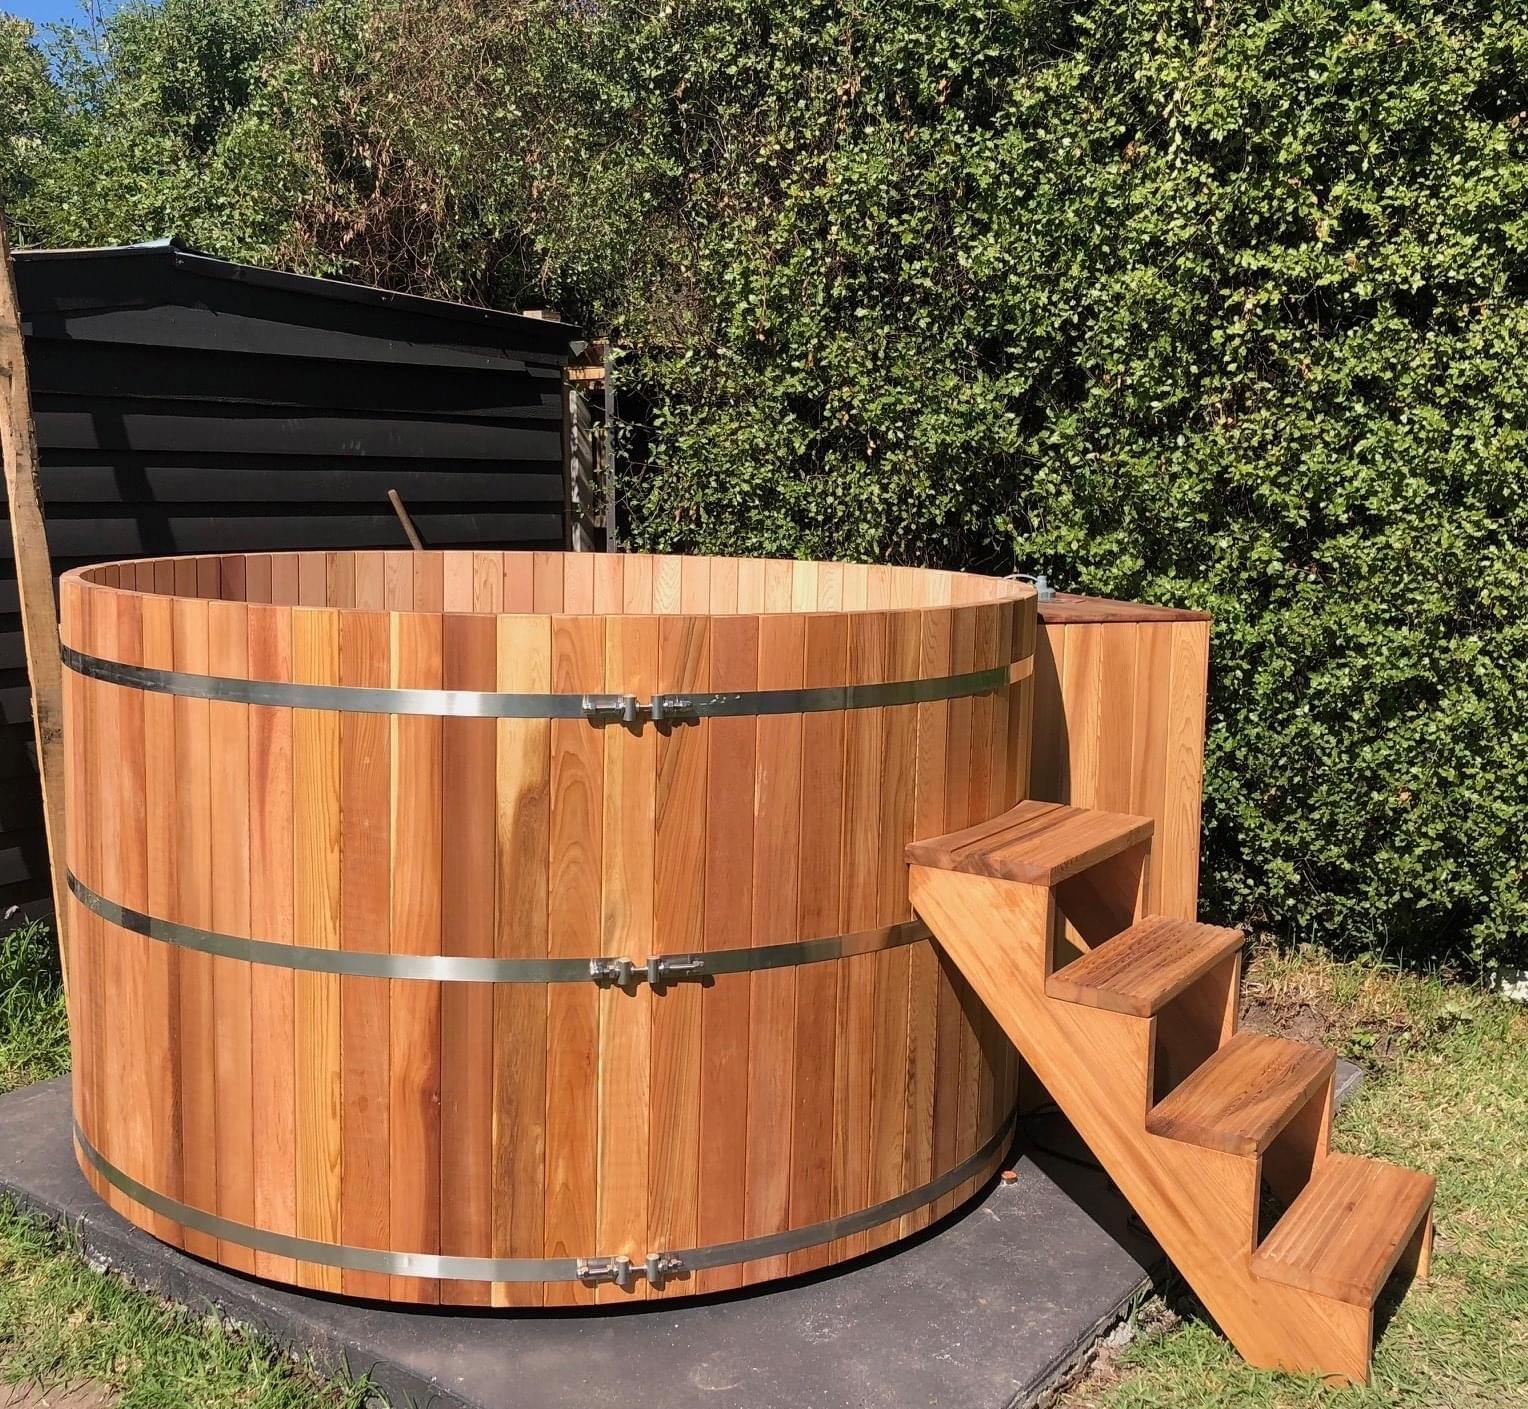 Cedar Hot Tub Large - Sproutwell Greenhouses